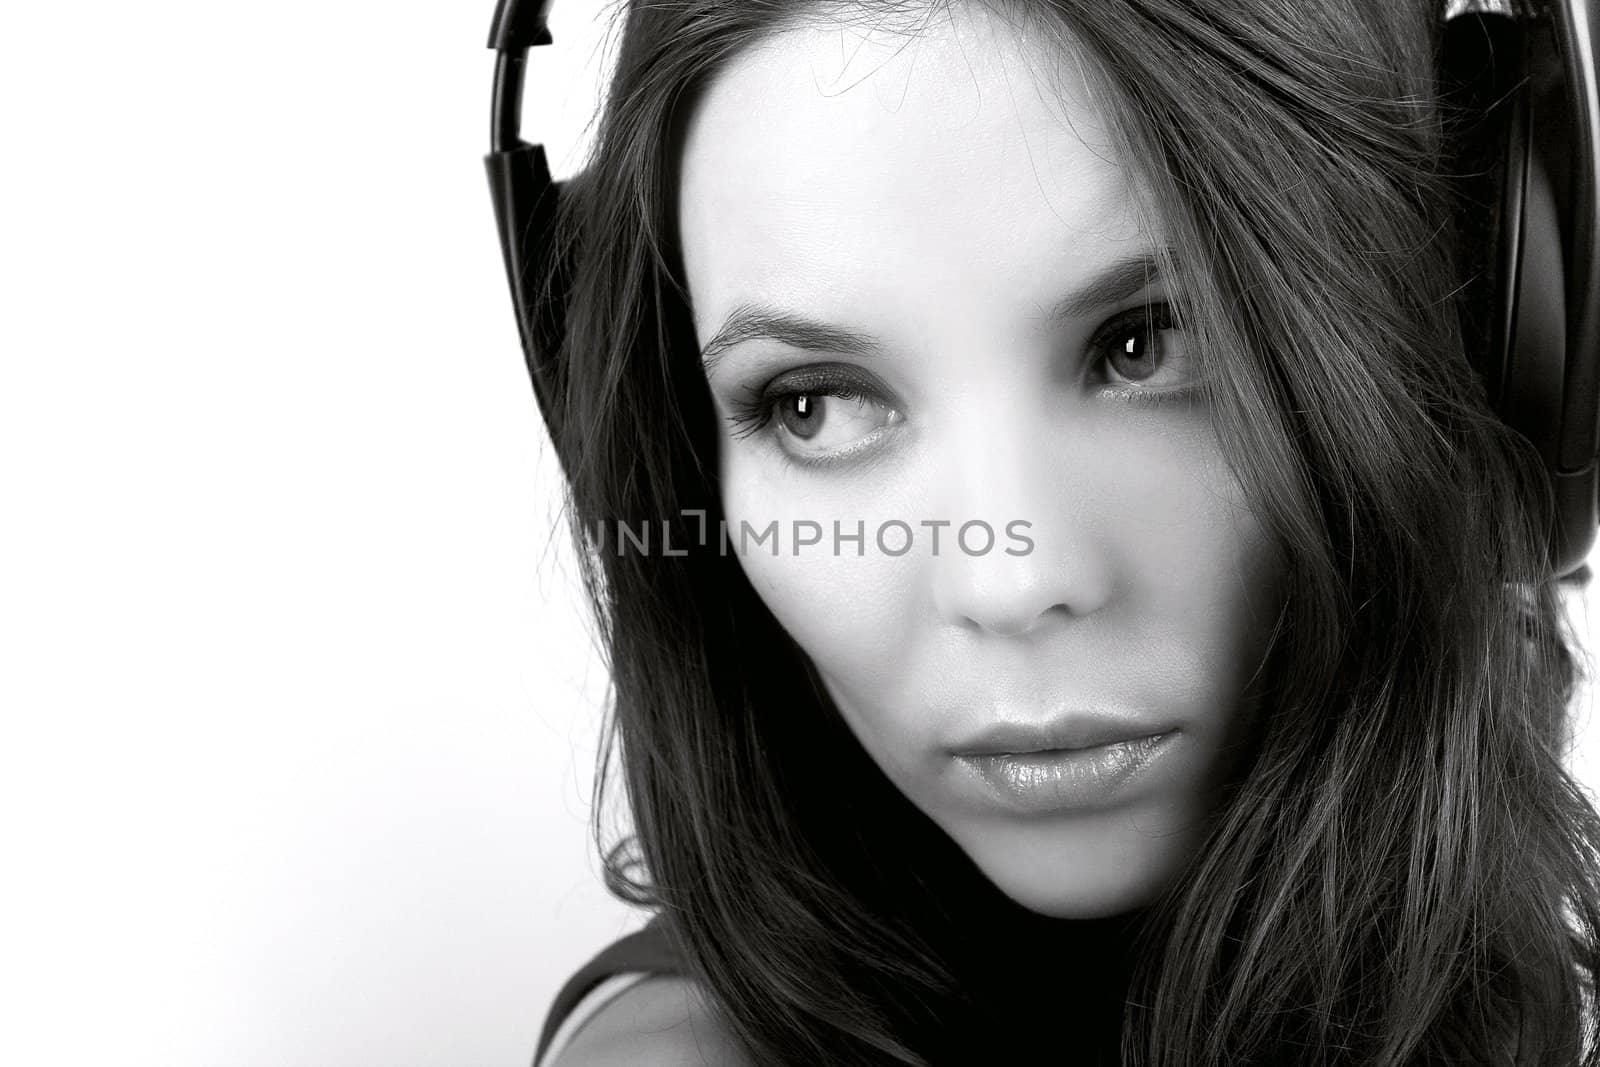 Pretty young woman in earphones closely in monochrome